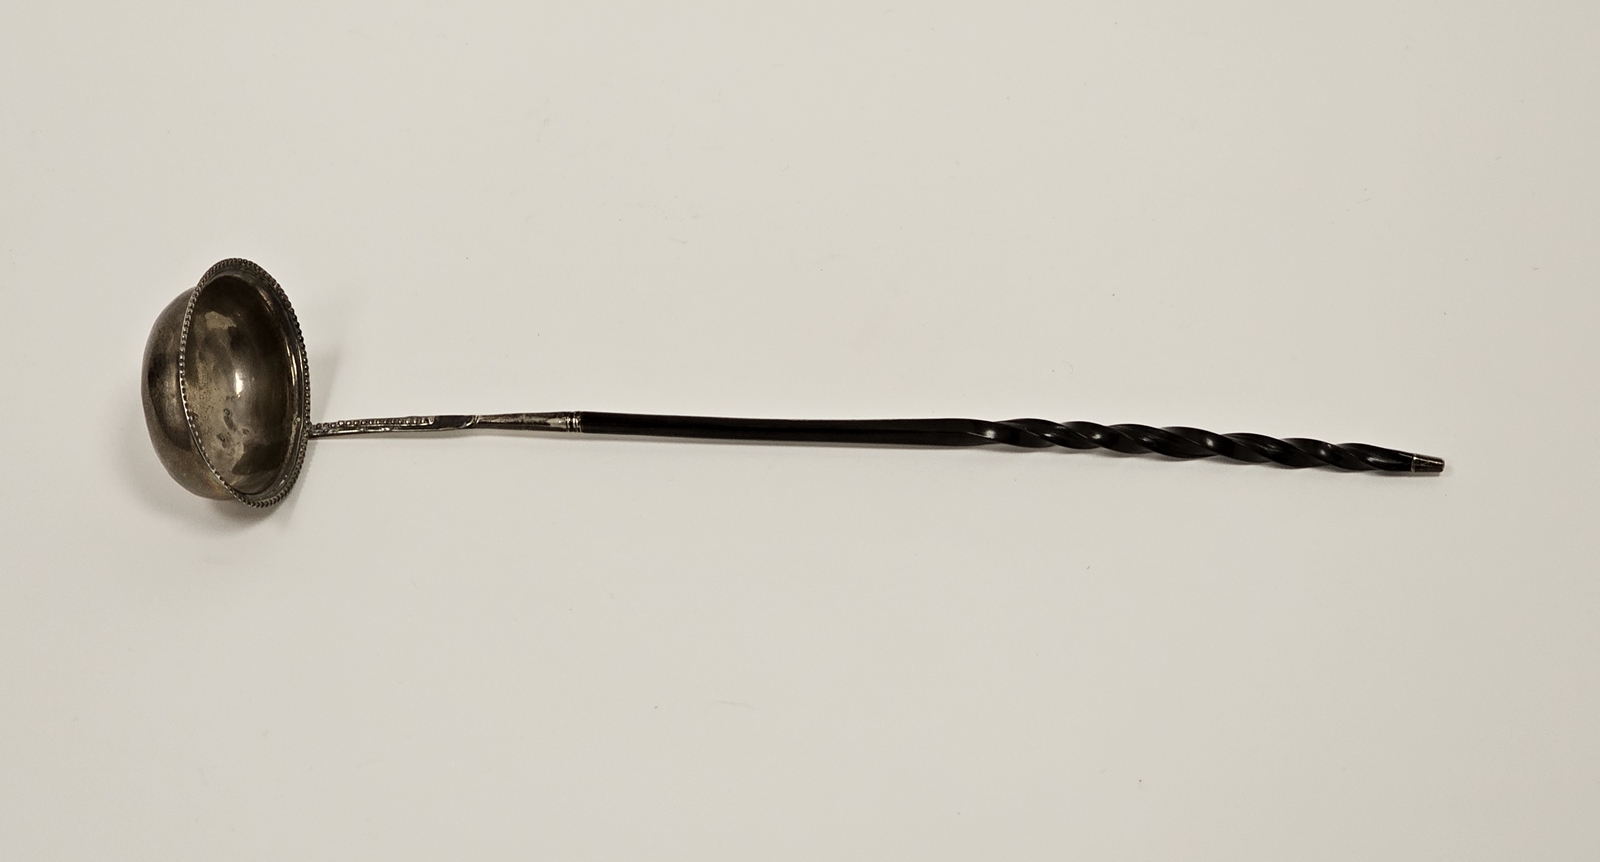 Georgian silver toddy ladle, hallmarked London, indistinct date code, probably 1781, makers marks